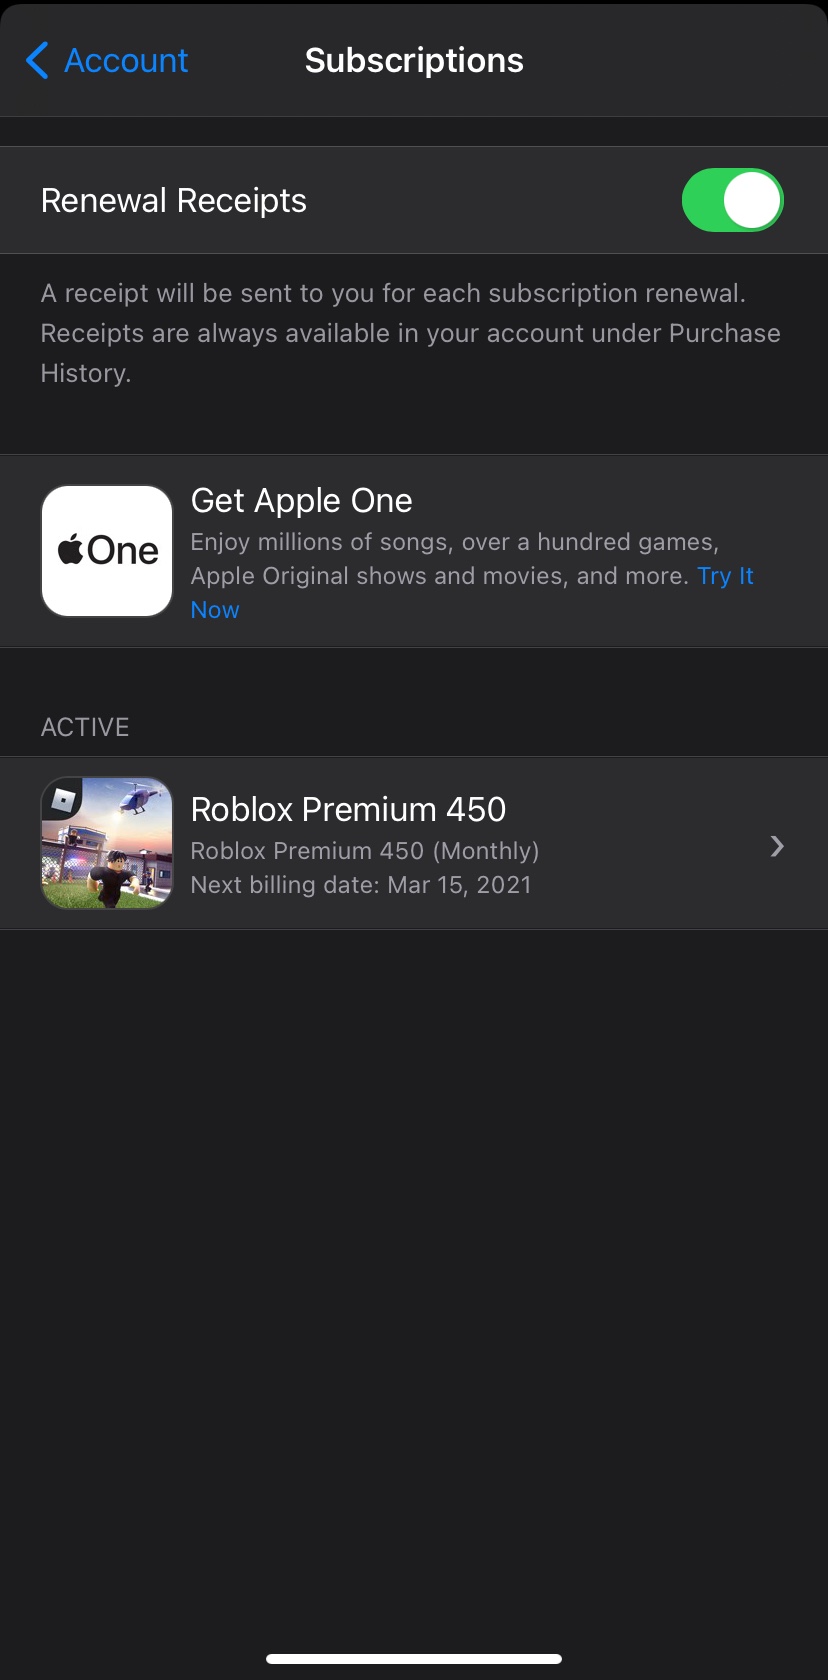 Why can't I buy robux with my id credit b… - Apple Community